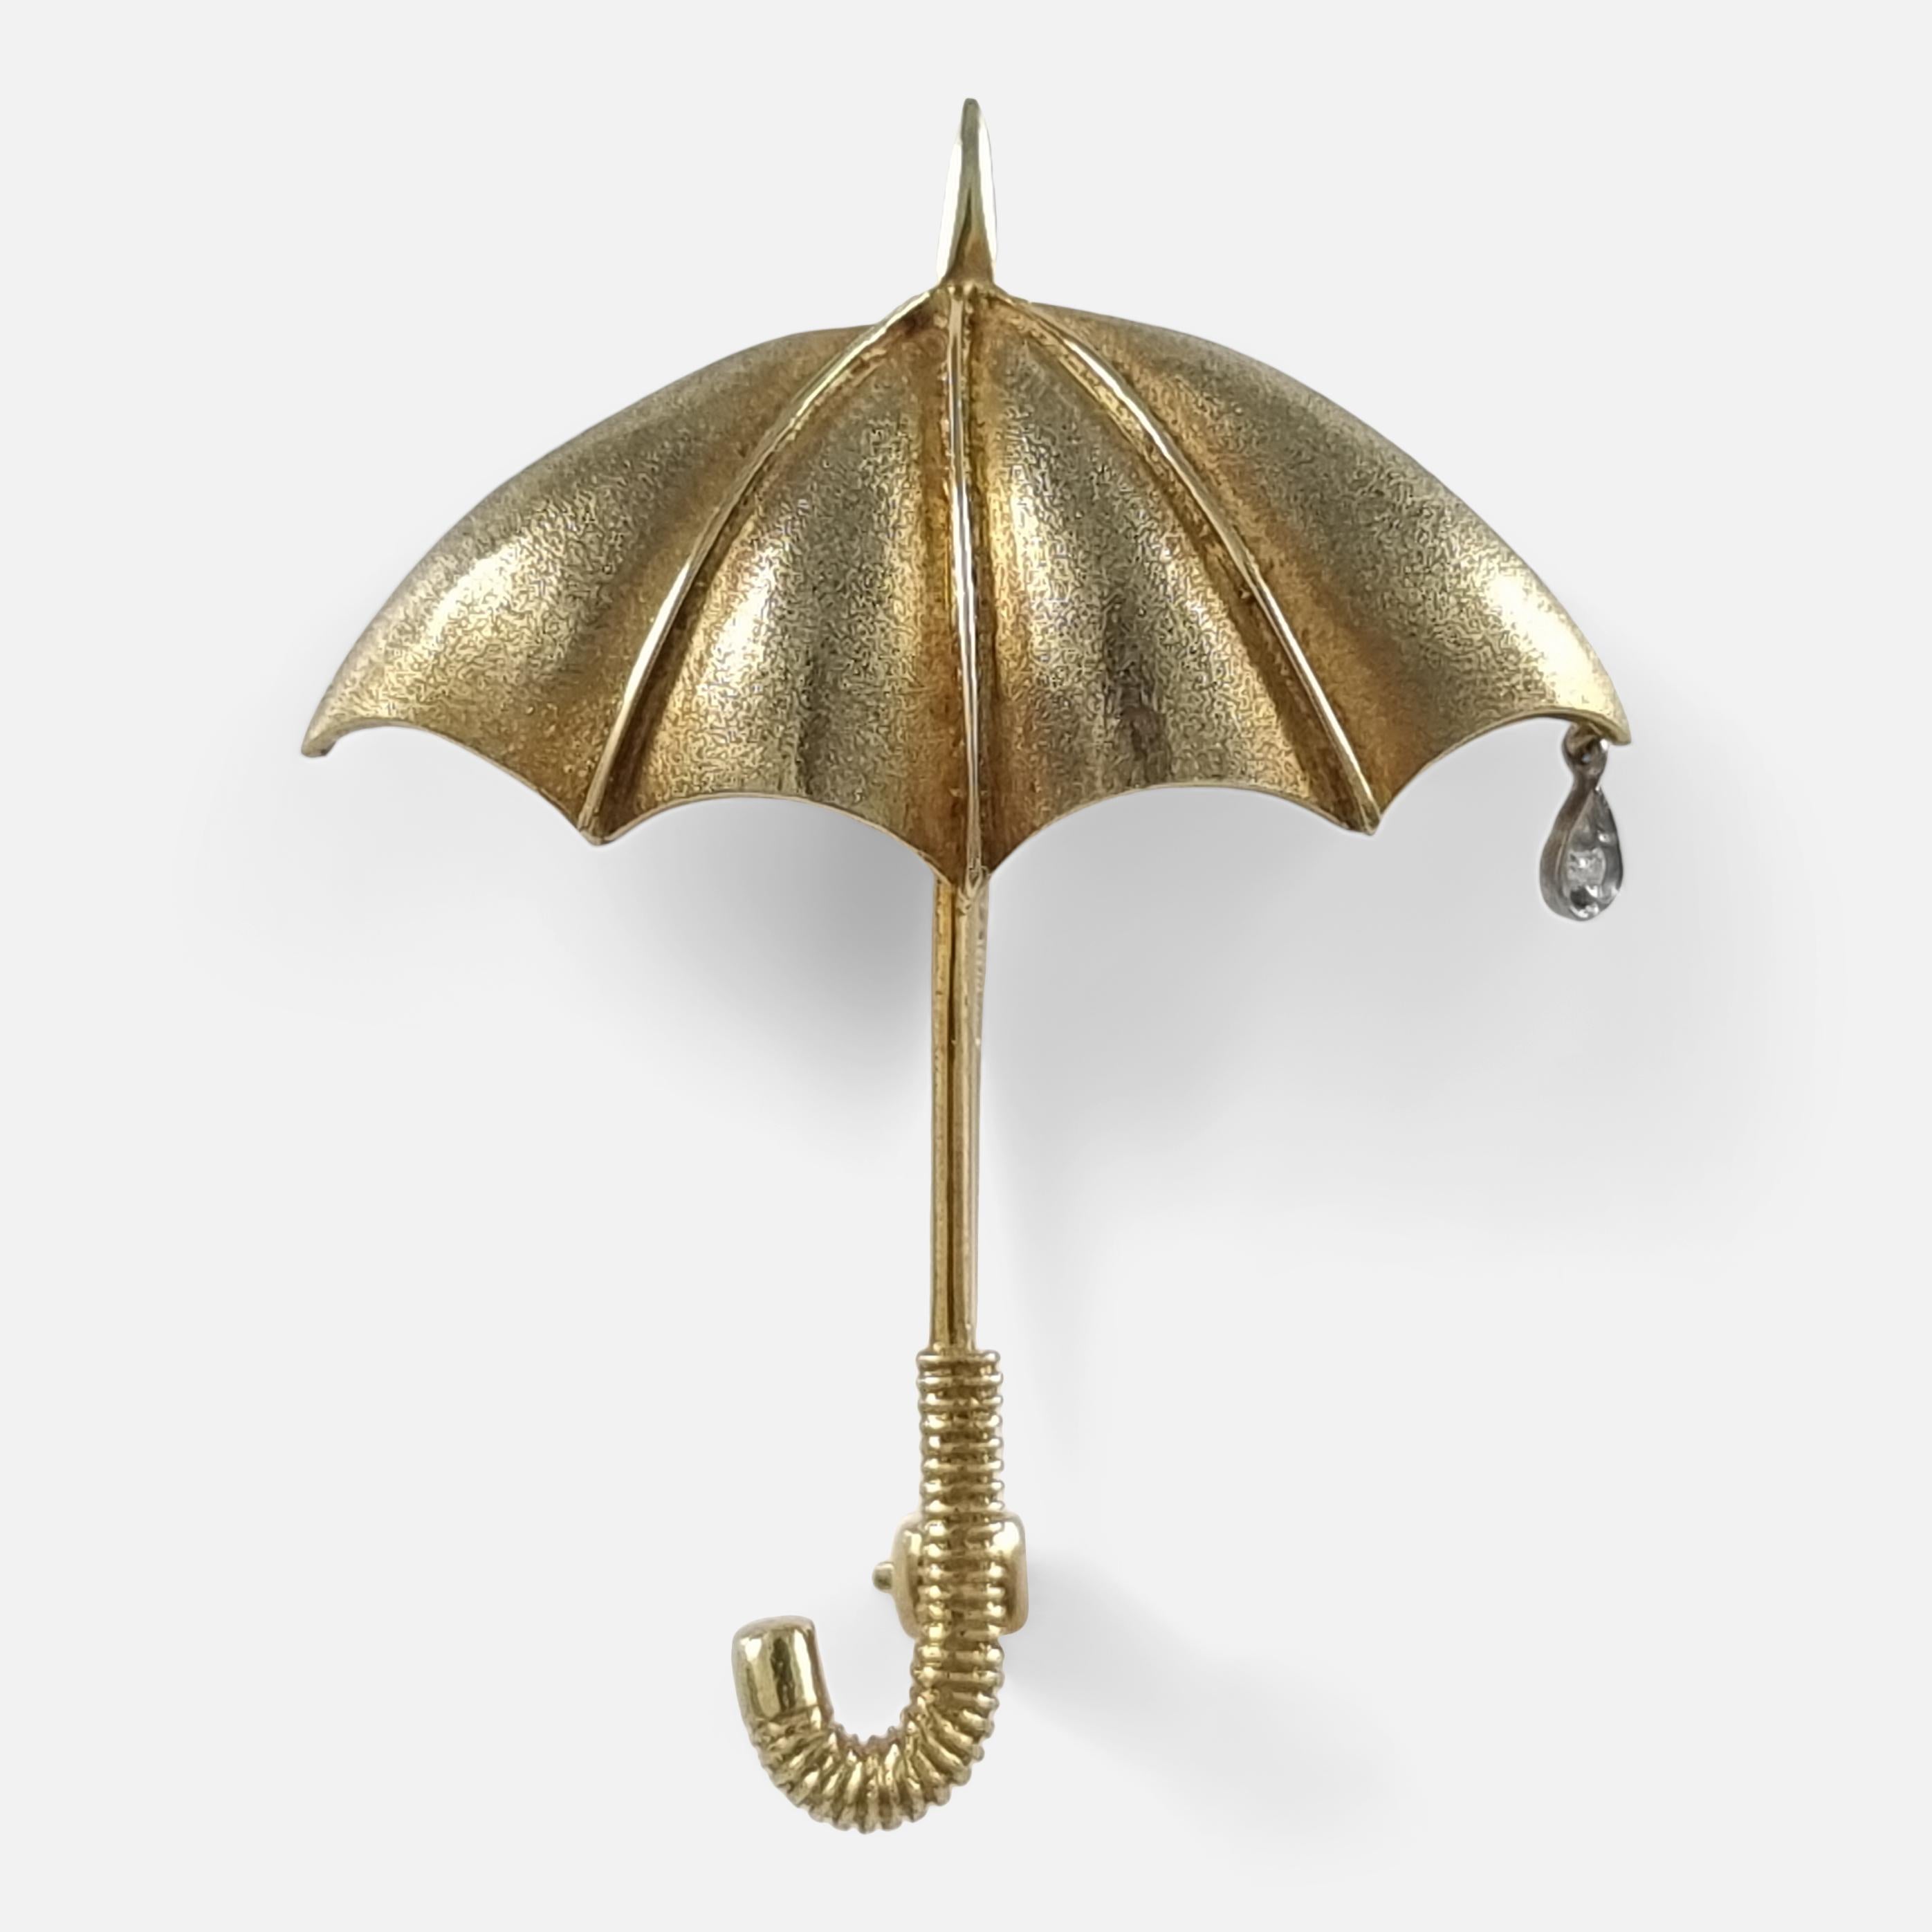 An E. Wolfe & Co. novelty brooch, masterfully created in 18ct gold. This charming umbrella-shaped brooch boasts a unique combination of matte and polished finishes. Its handle is intricately designed with reeded detailing, while the canopy's tip